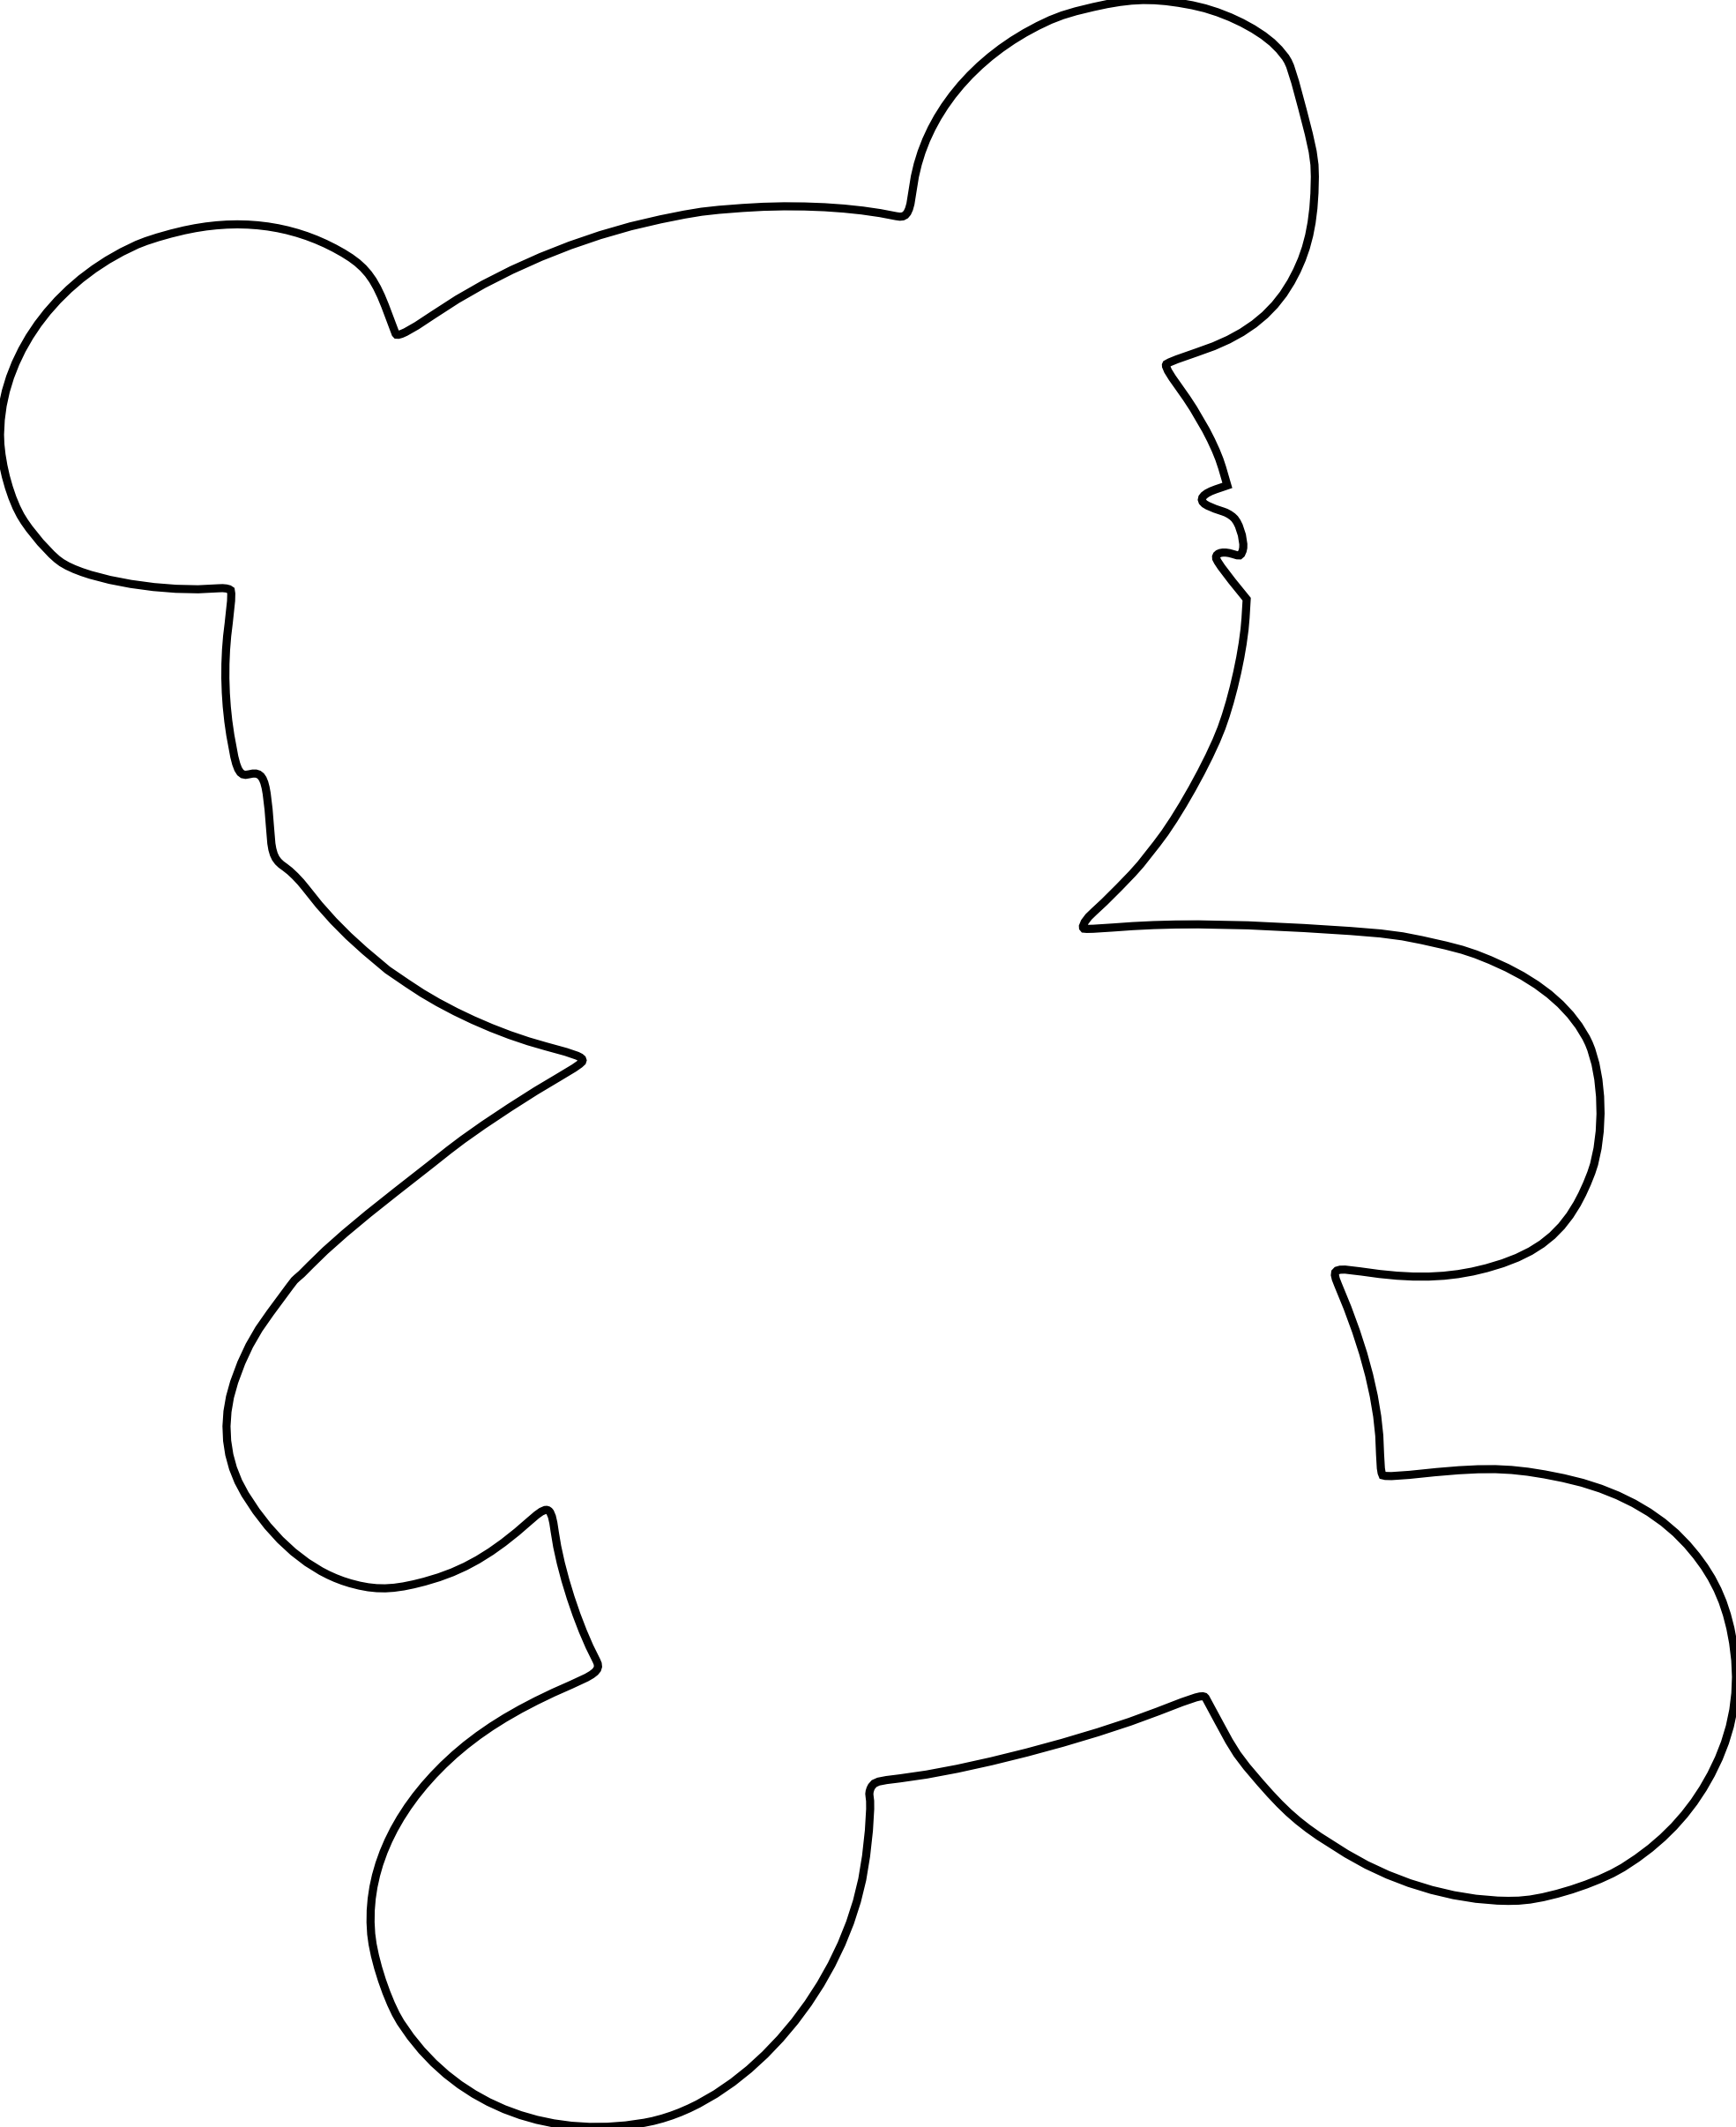 Free Outline Of A Teddy Bear, Download Free Outline Of A Teddy Bear png